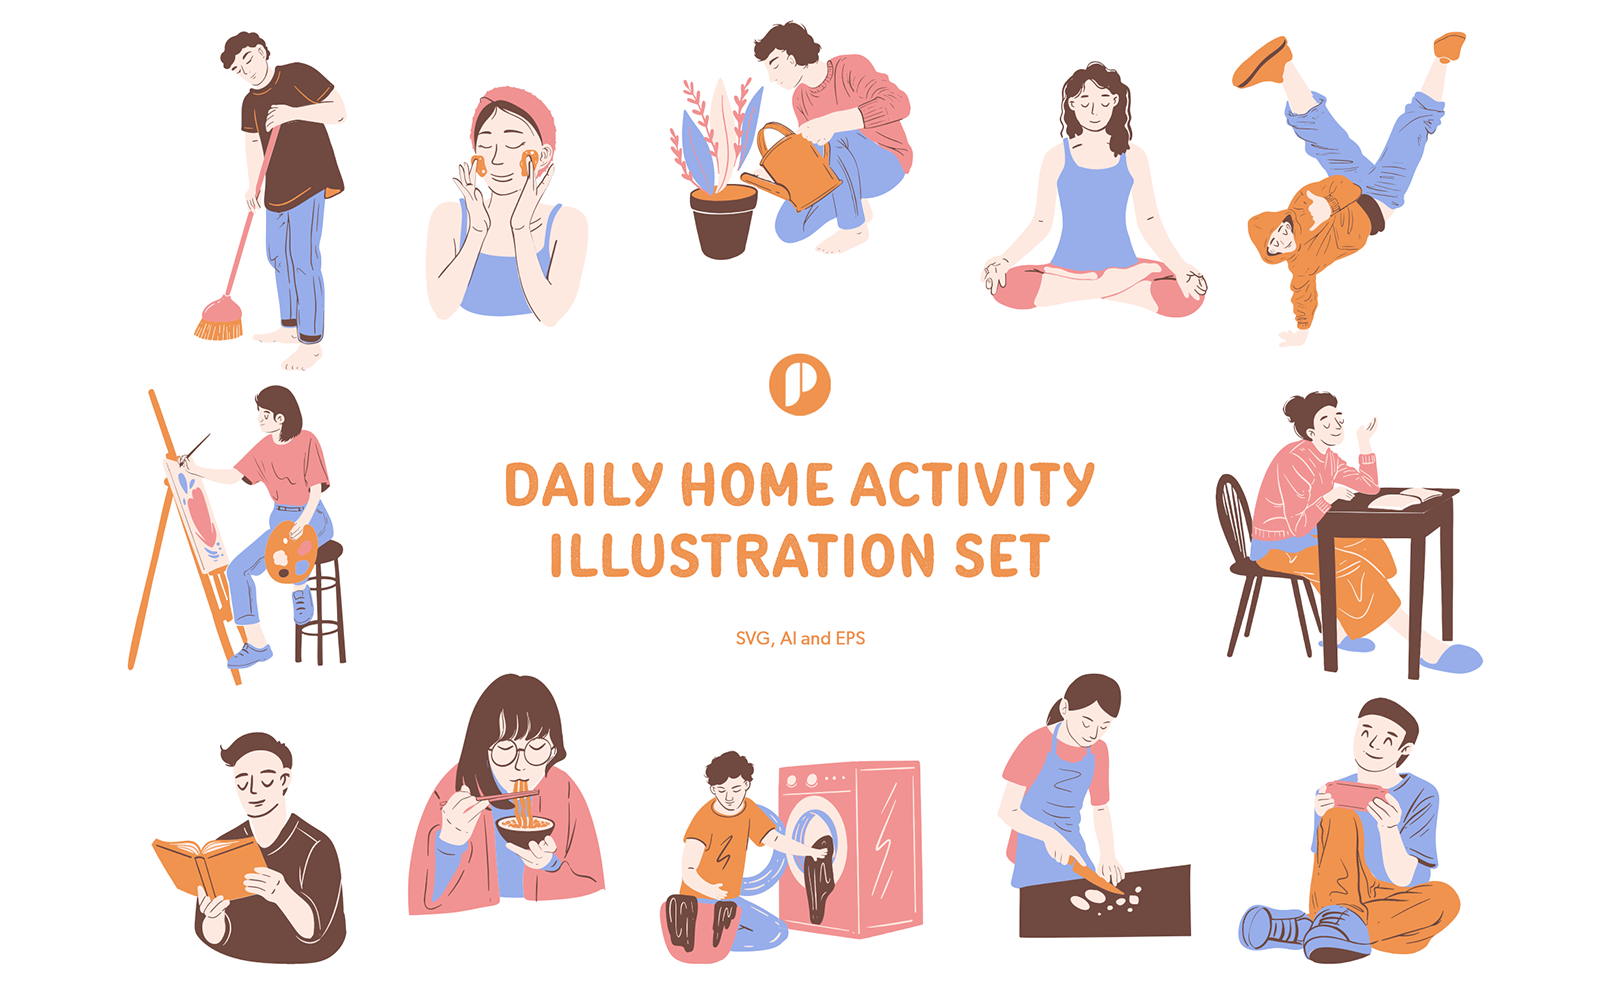 Chilling daily home activity illustration set